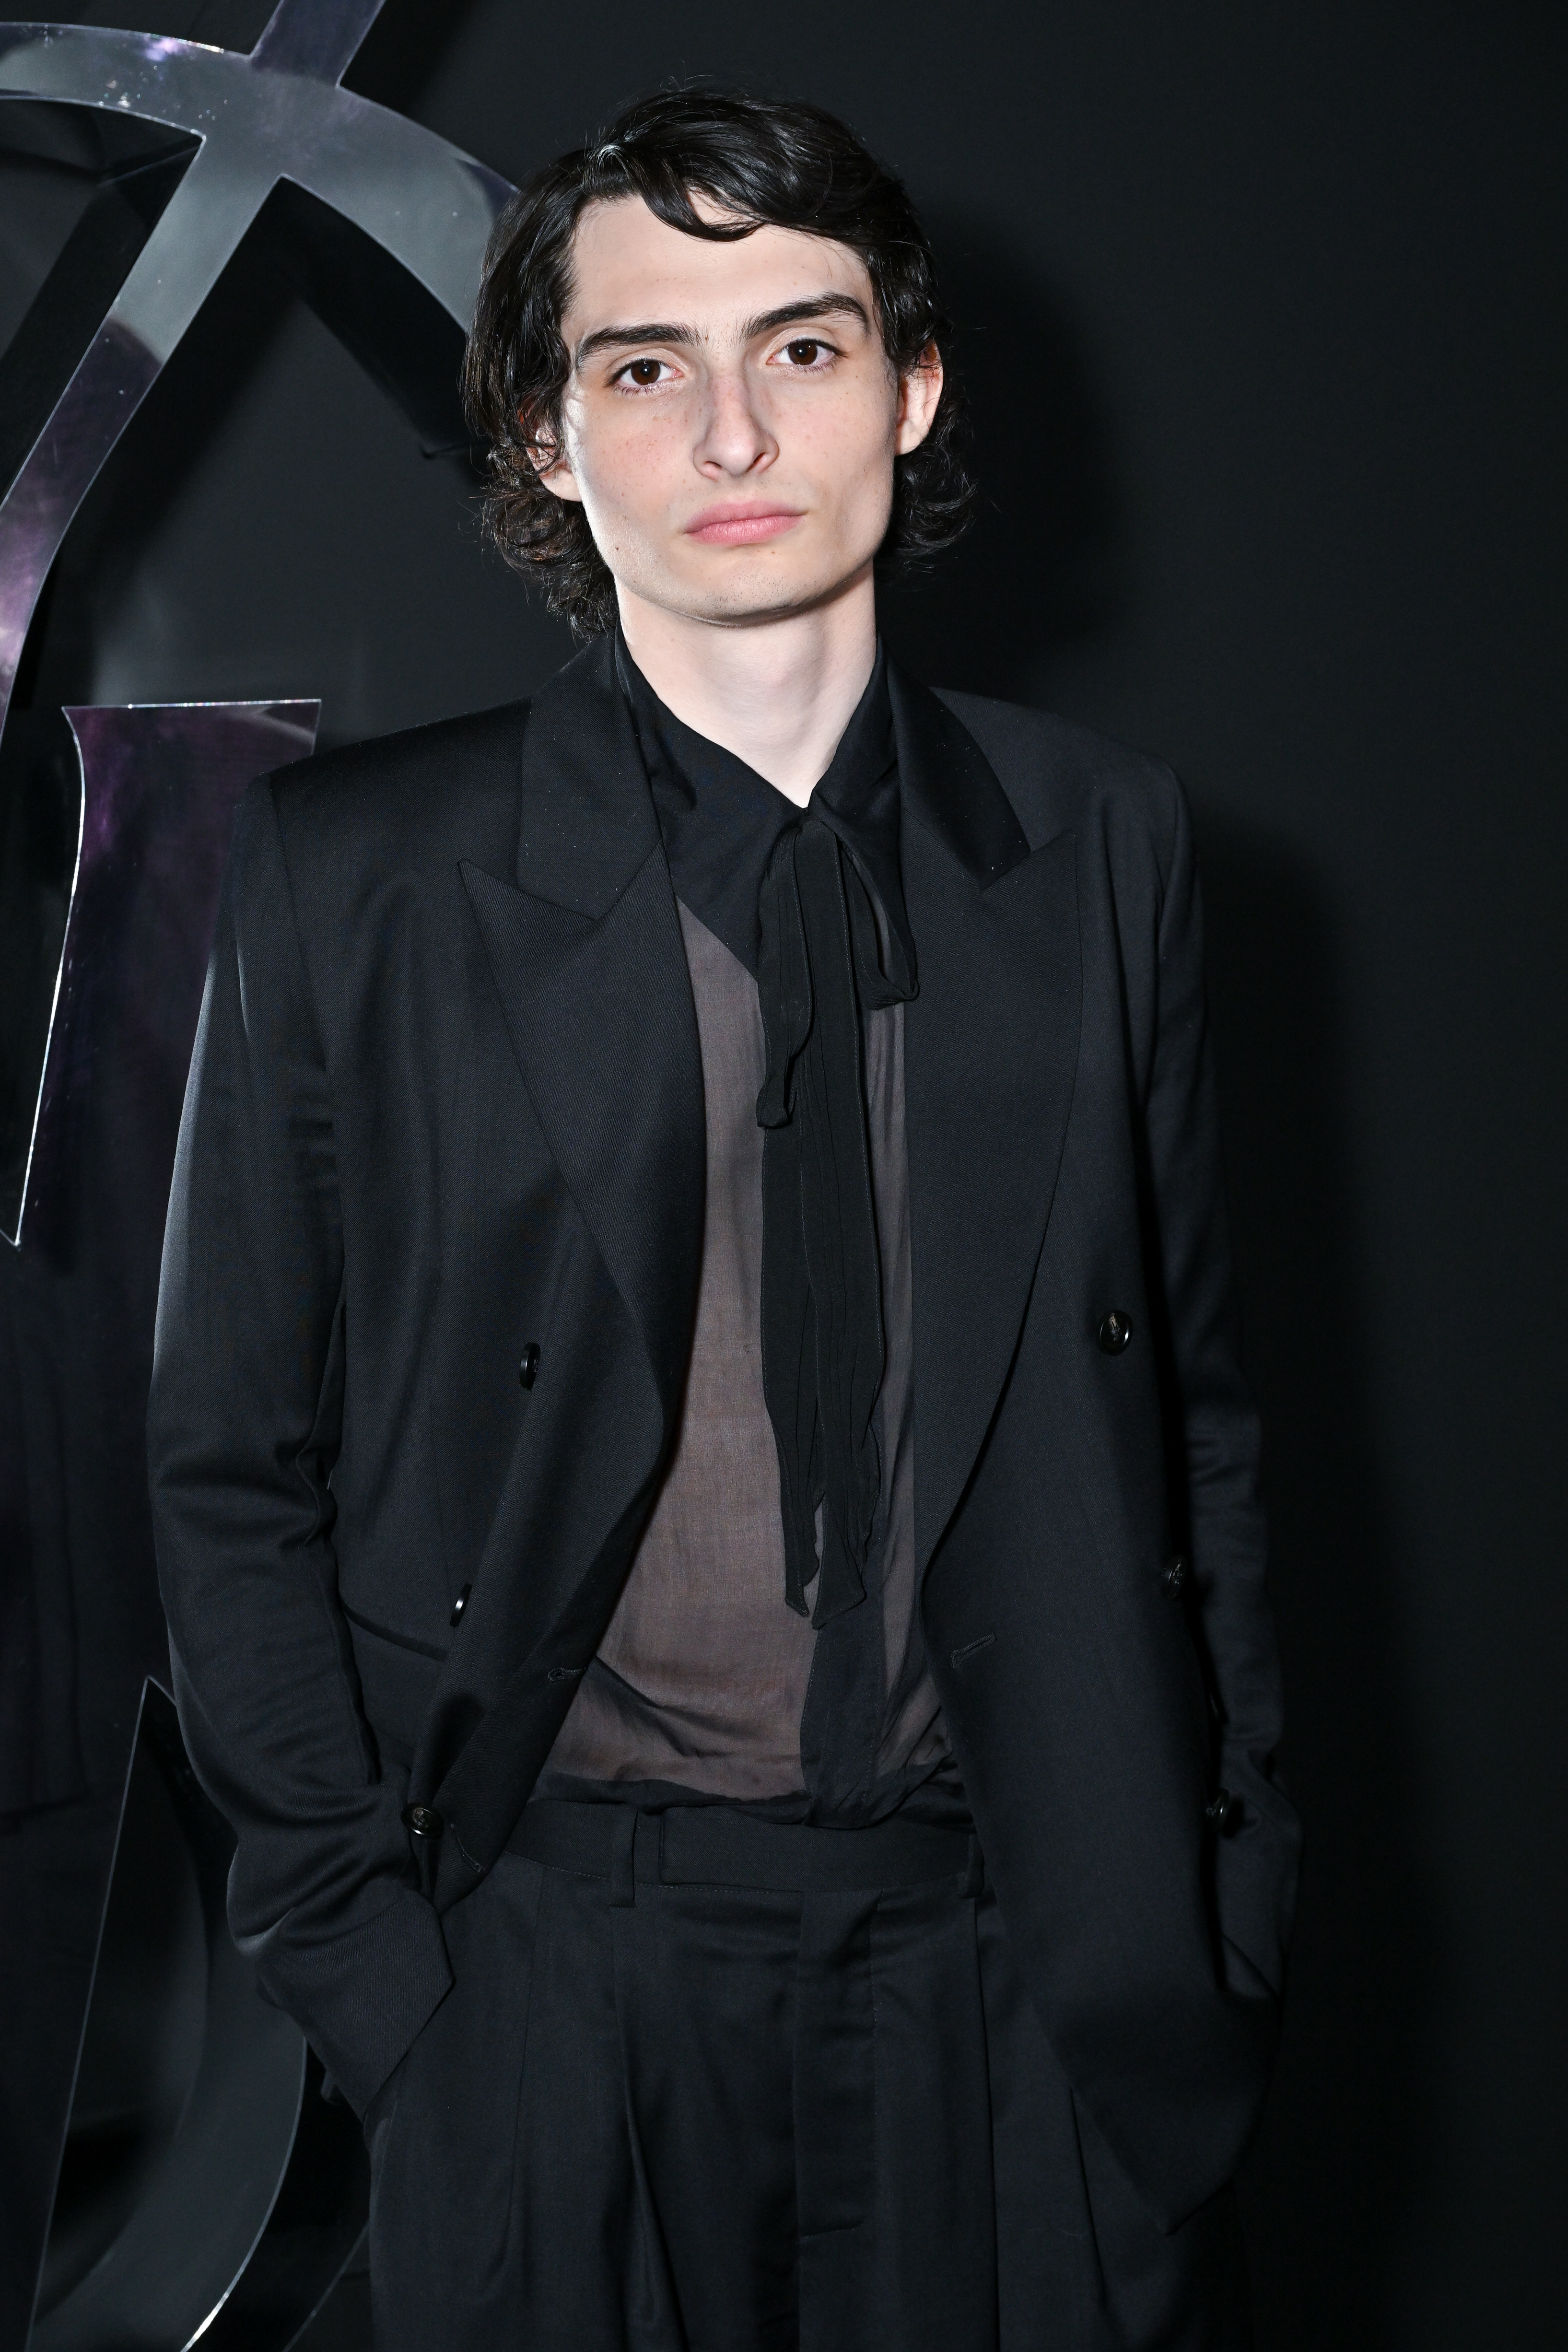 Person in a black suit with tie poses at a movie event